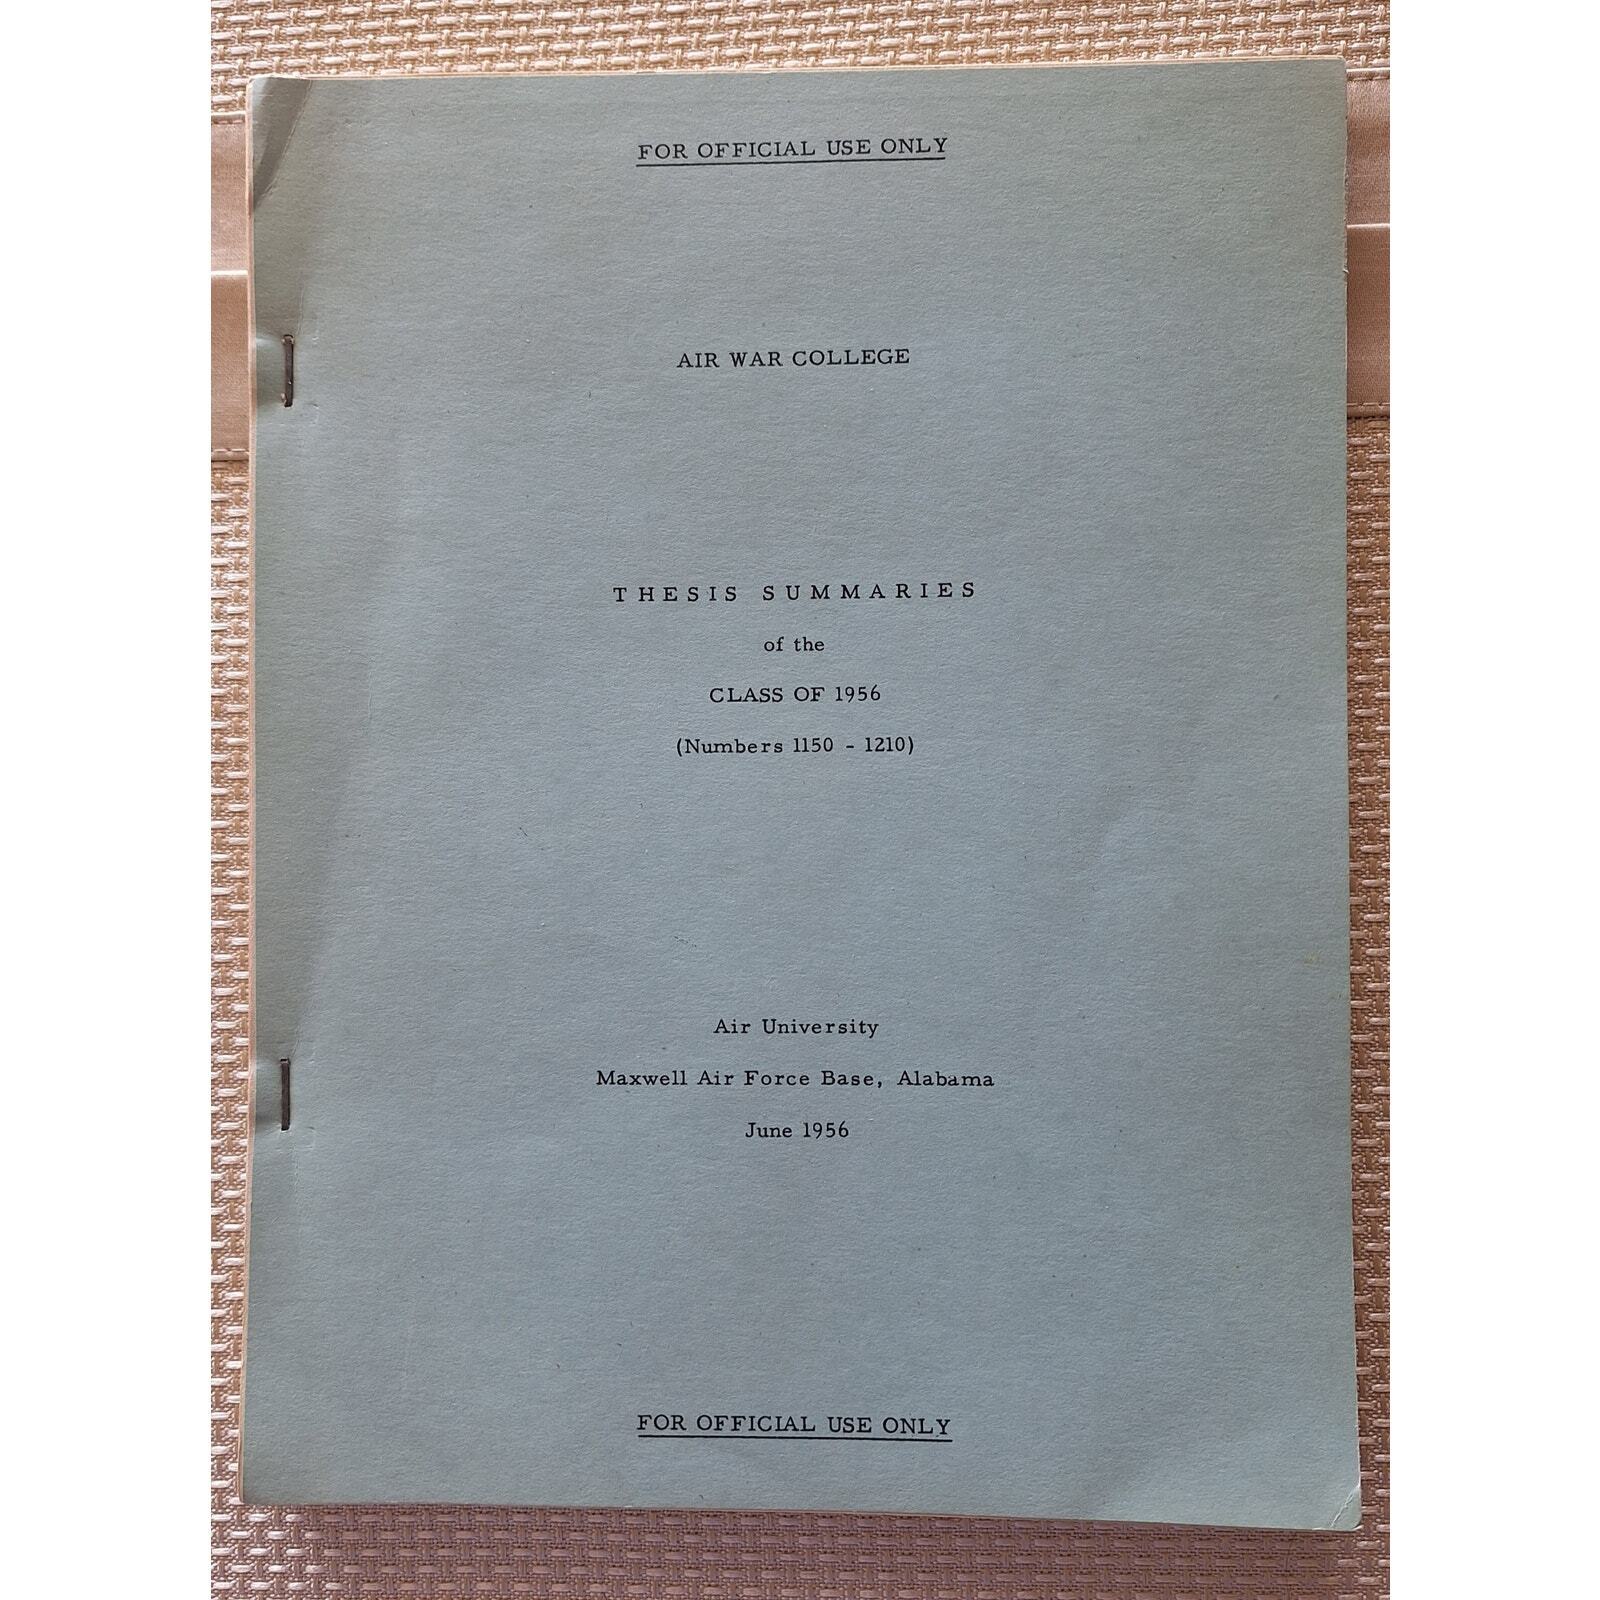 ASAF Air War College 1956 Thesis Summaries Rare Official Use